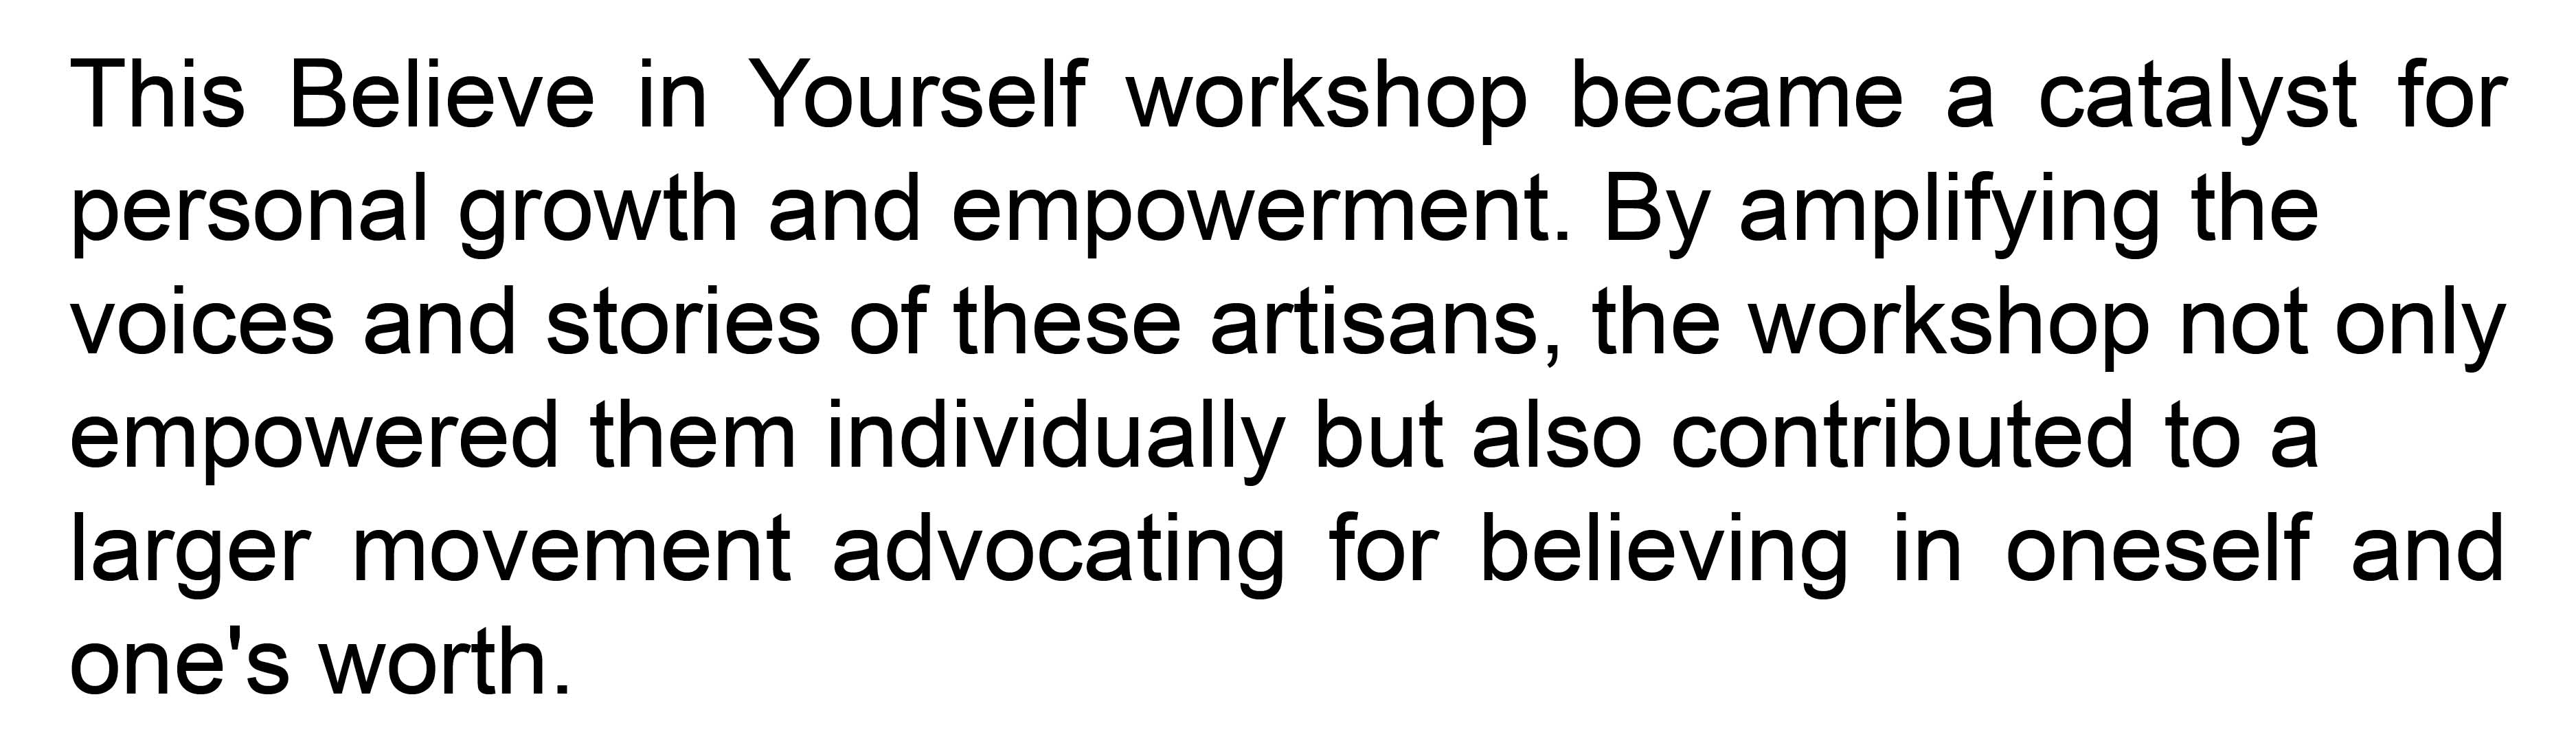 This Believe in Yourself workshop became a catalyst for personal growth and empowerment. By amplifying the voices and stories of these artisans, the workshop not only empowered them individually but also contributed to a larger movement
advocating for believing in oneself and one's worth.